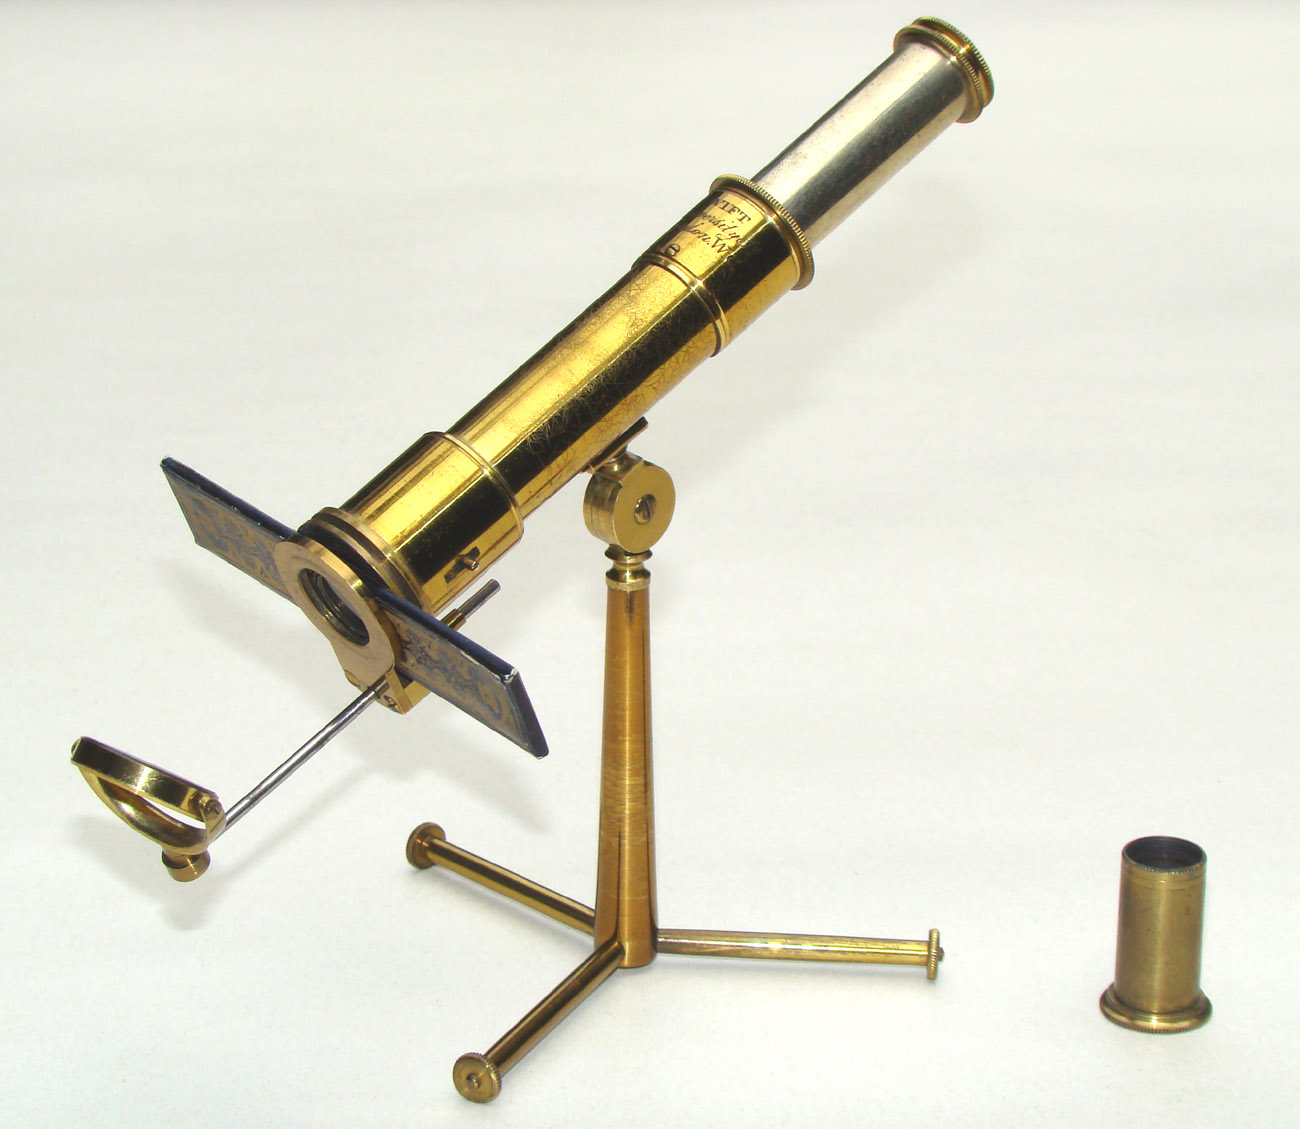 RARE MINIATURE OUTFIT: THE SWIFT / BROWN MINIATURE POCKET MICROSCOPE WITH STAND